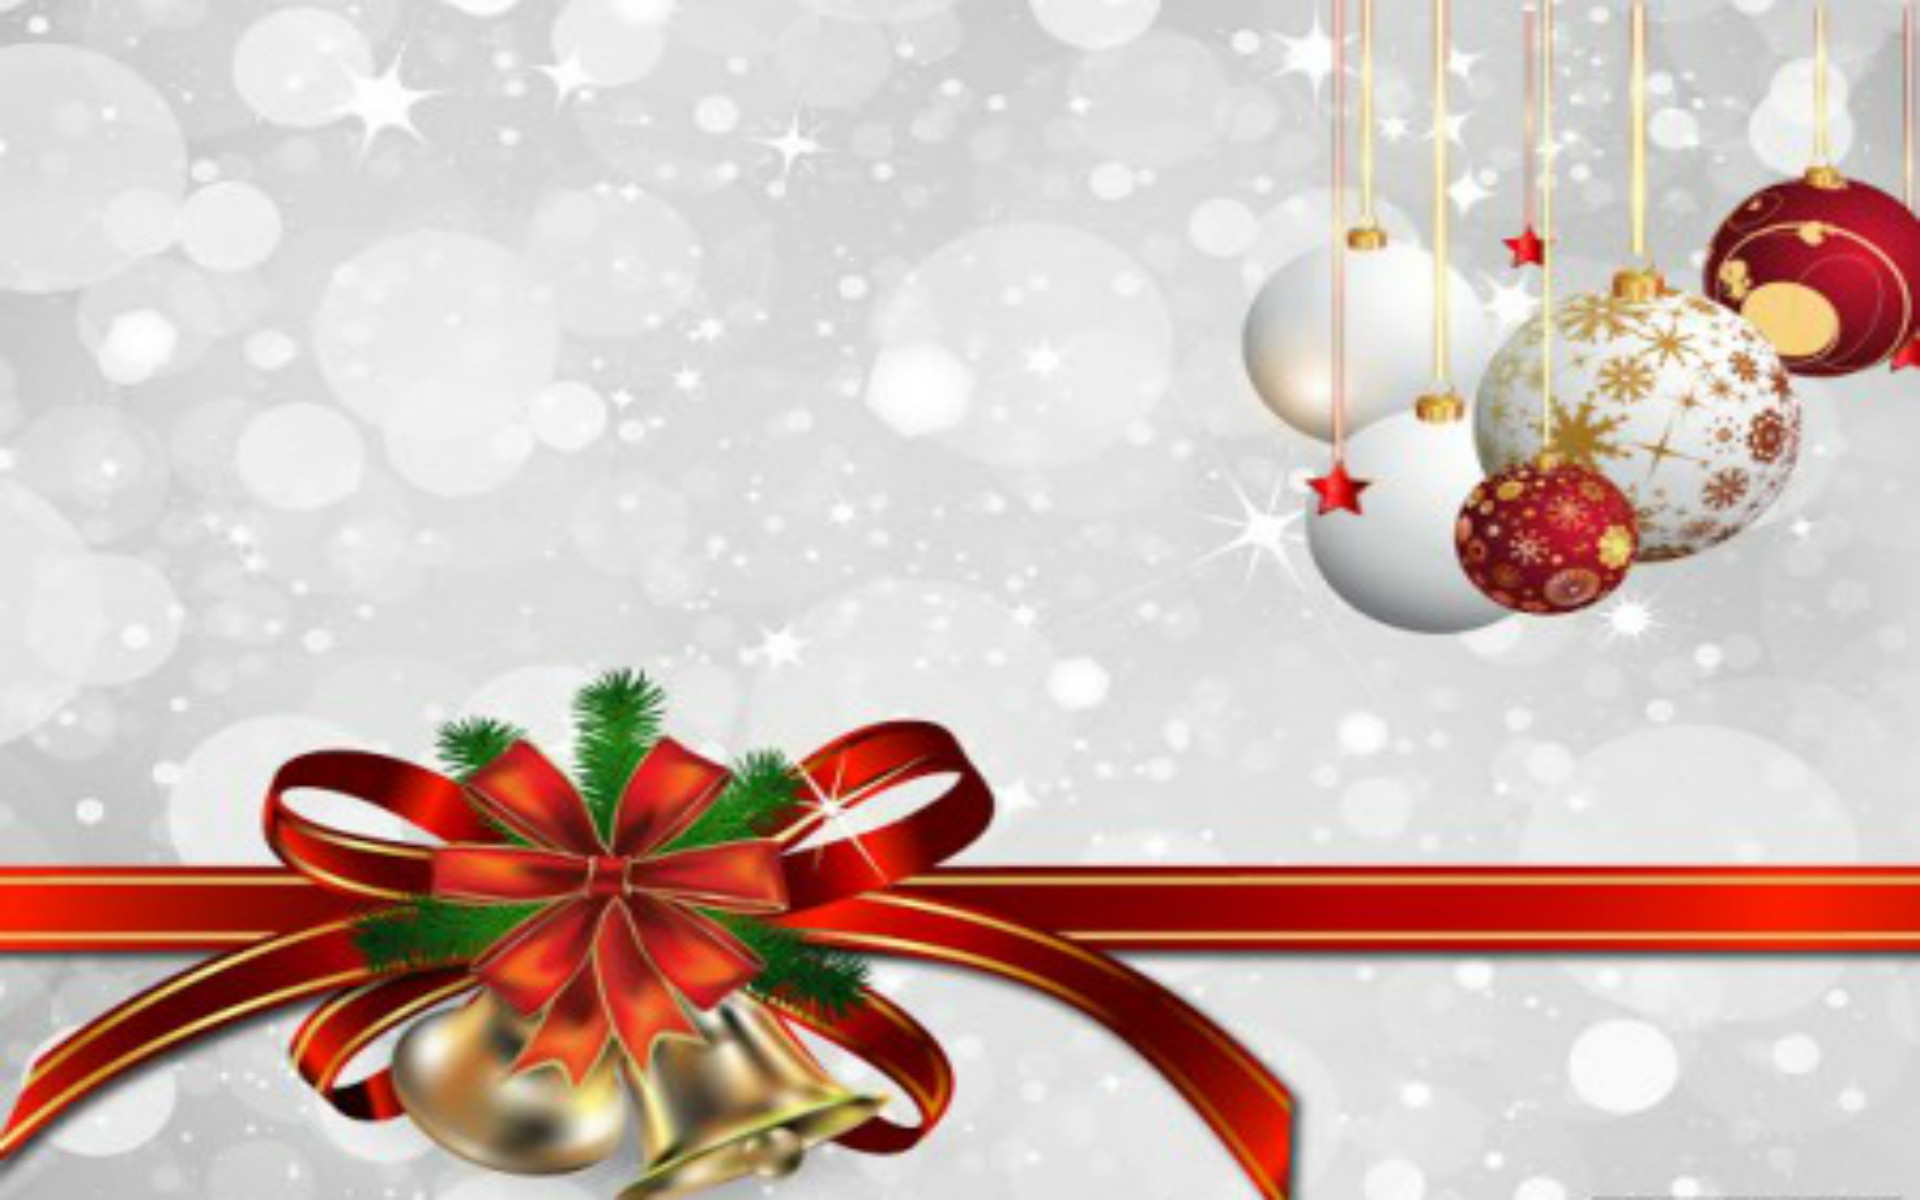 1920x1200 ... desktop backgrounds; 18 free christmas images background wallpapers  merry christmas ...